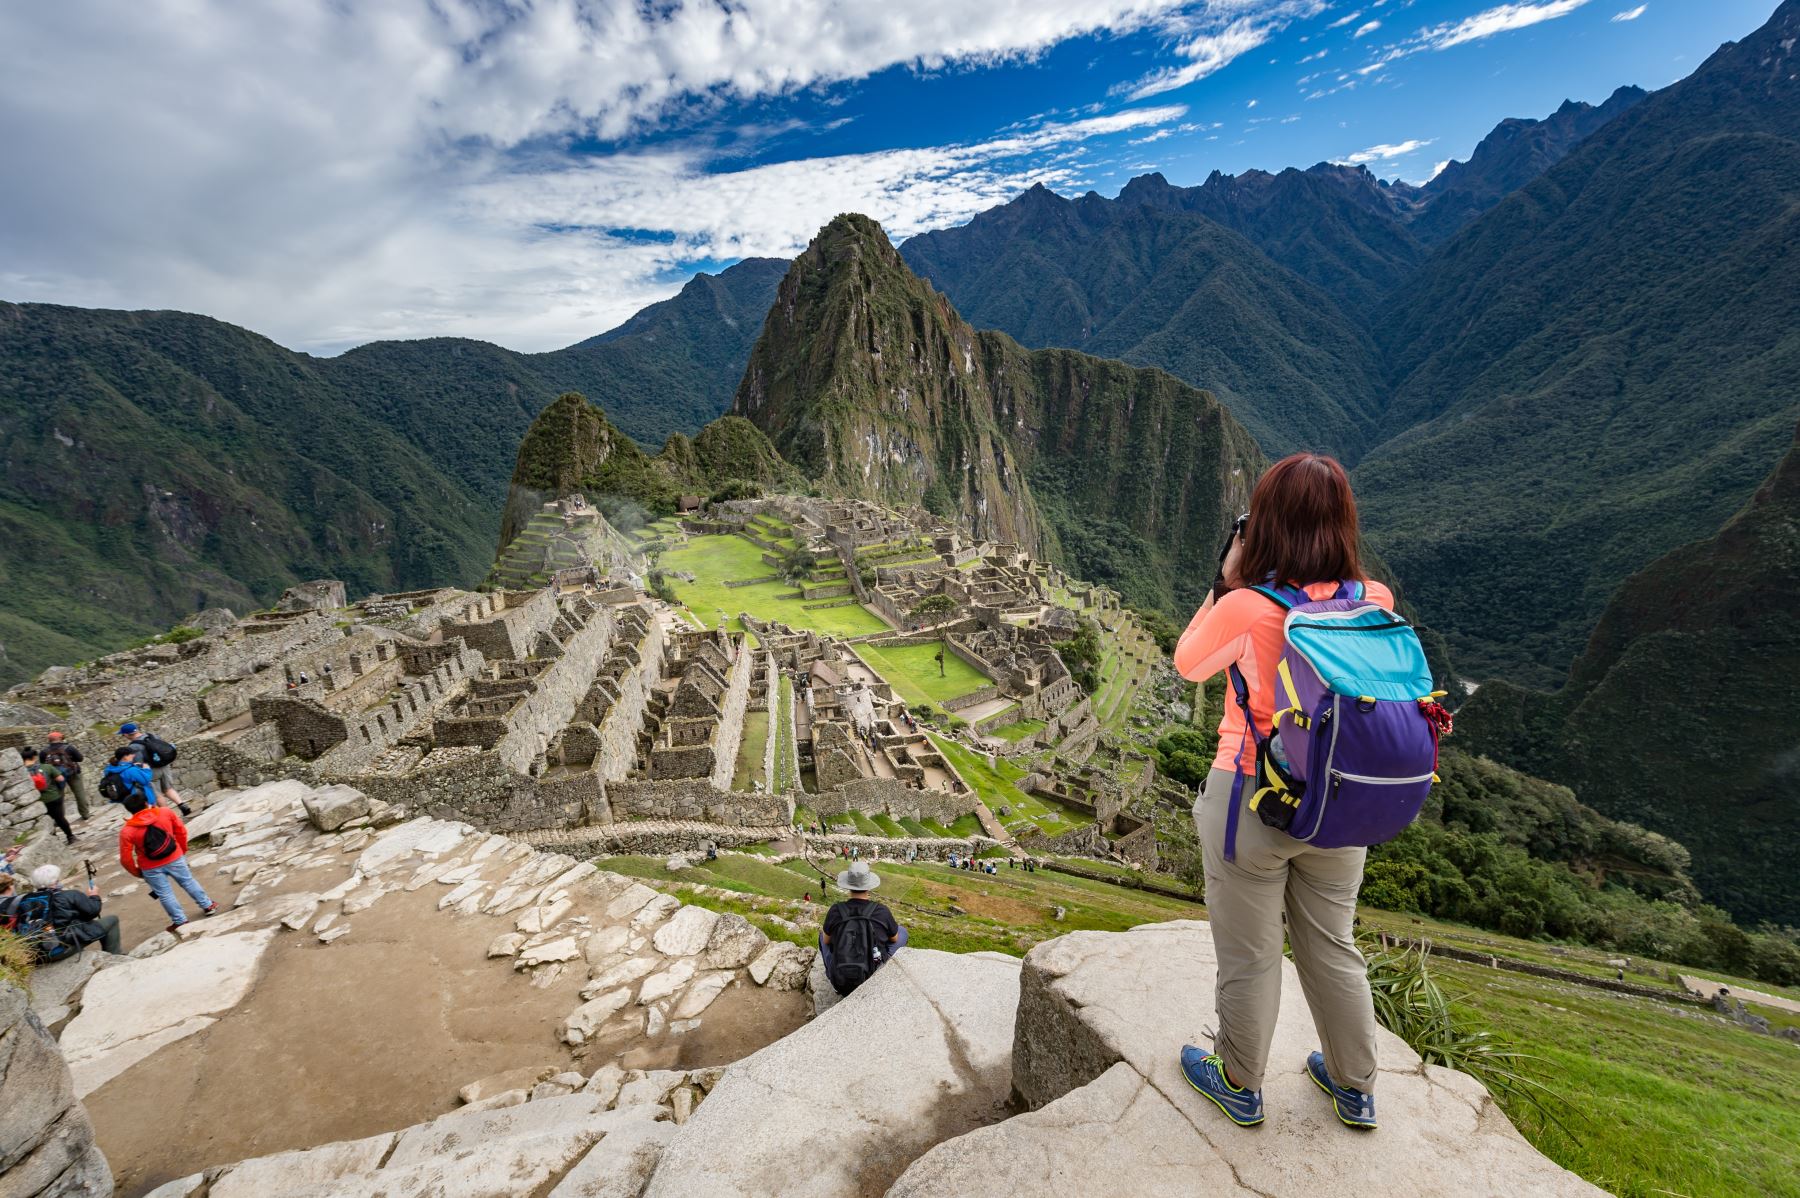 Entrepreneurs can visit tourist attractions in Peru.